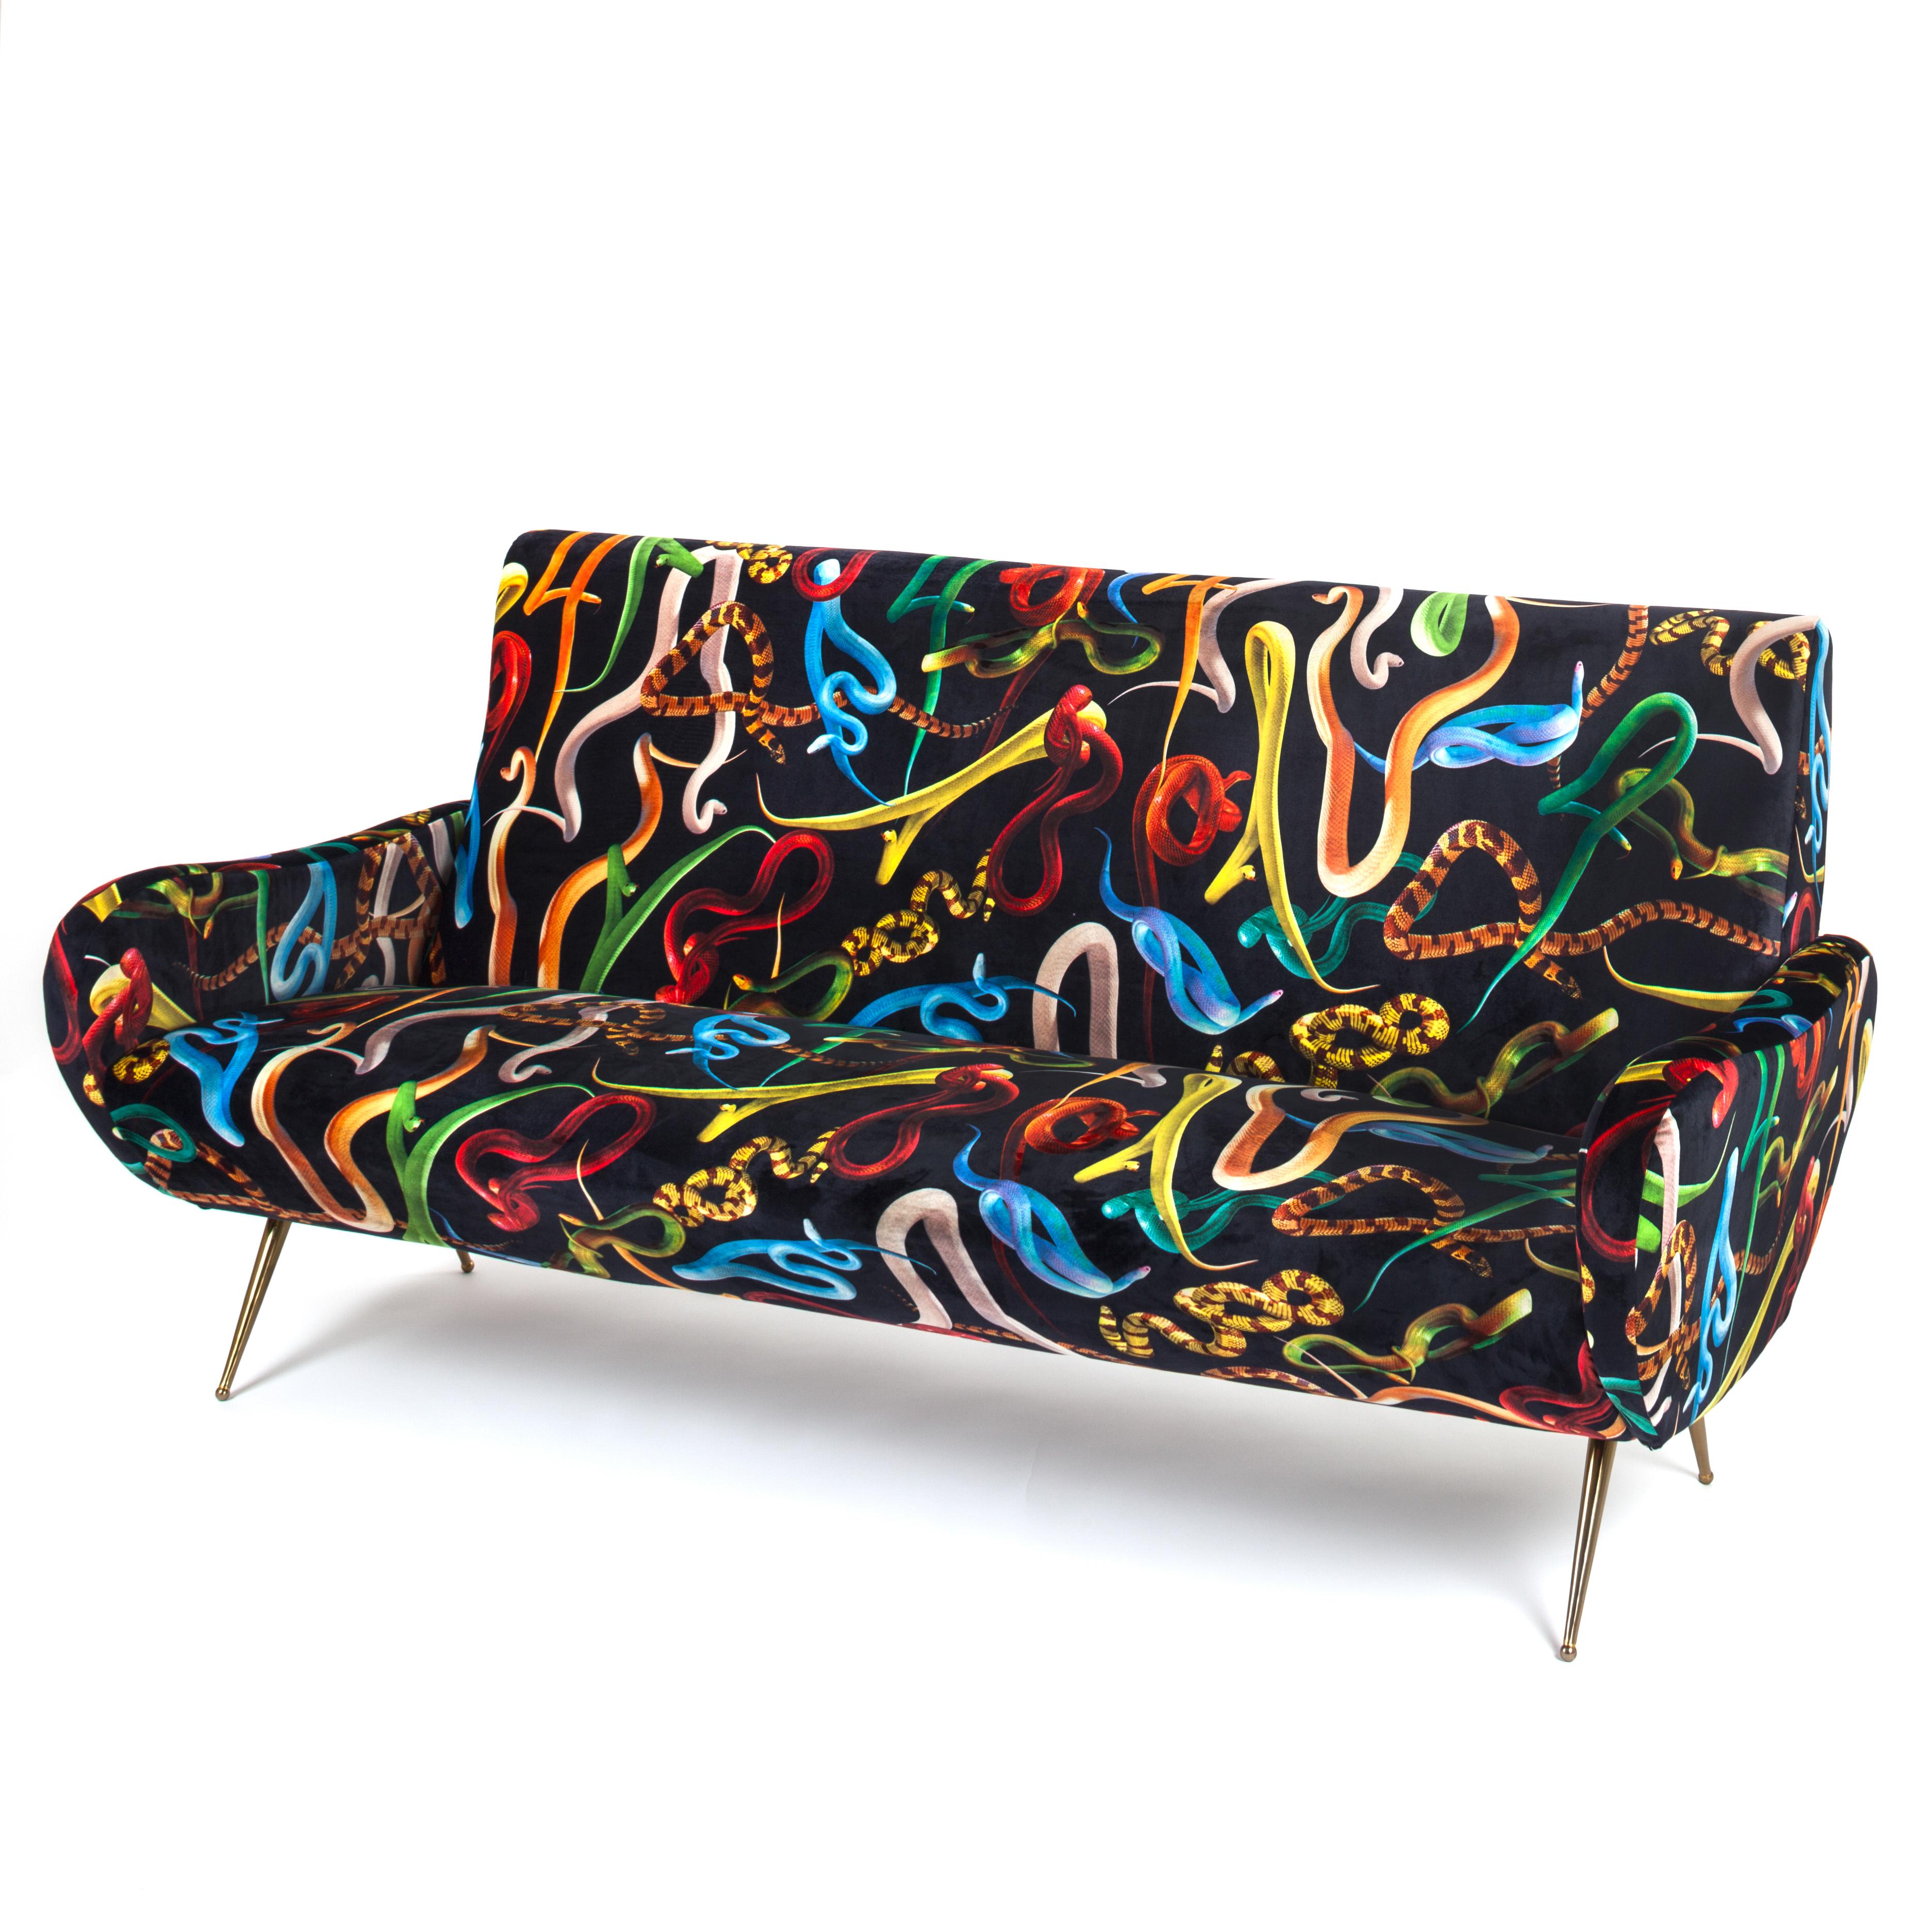 After the huge success of the armchair, the family gets bigger with the sofa. Decorate your living room with the eccentric patterns designed by Toiletpaper and realise your wildest dreams.

- Materials: Fabrics in polyester, frame in wood with